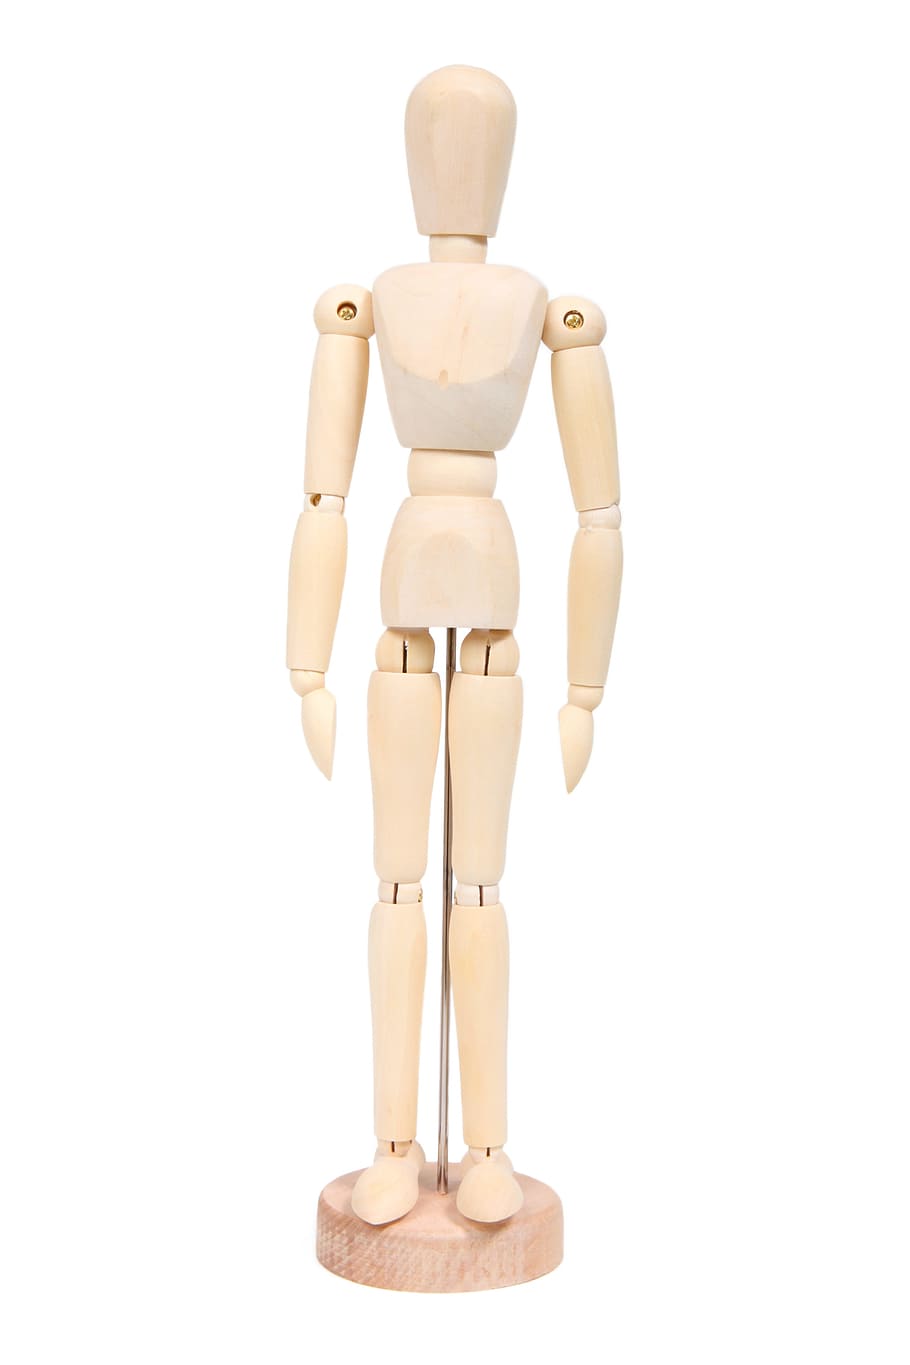 beige wooden mannequin, body, boy, doll, figure, figurine, guy, human, isolated, male